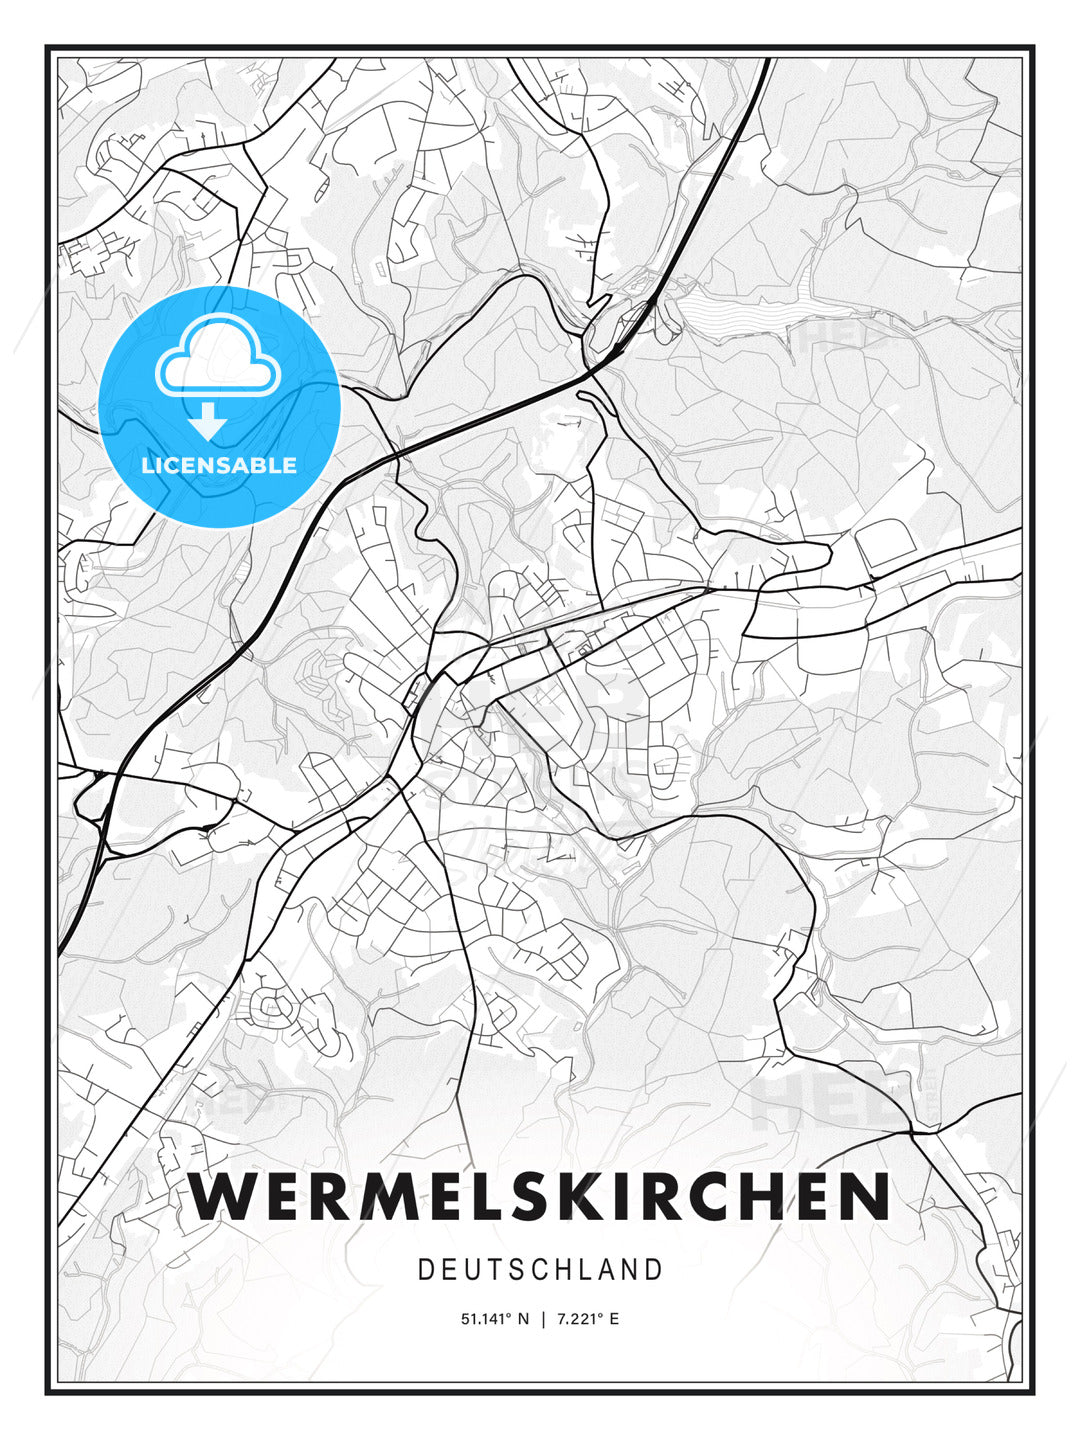 Wermelskirchen, Germany, Modern Print Template in Various Formats - HEBSTREITS Sketches